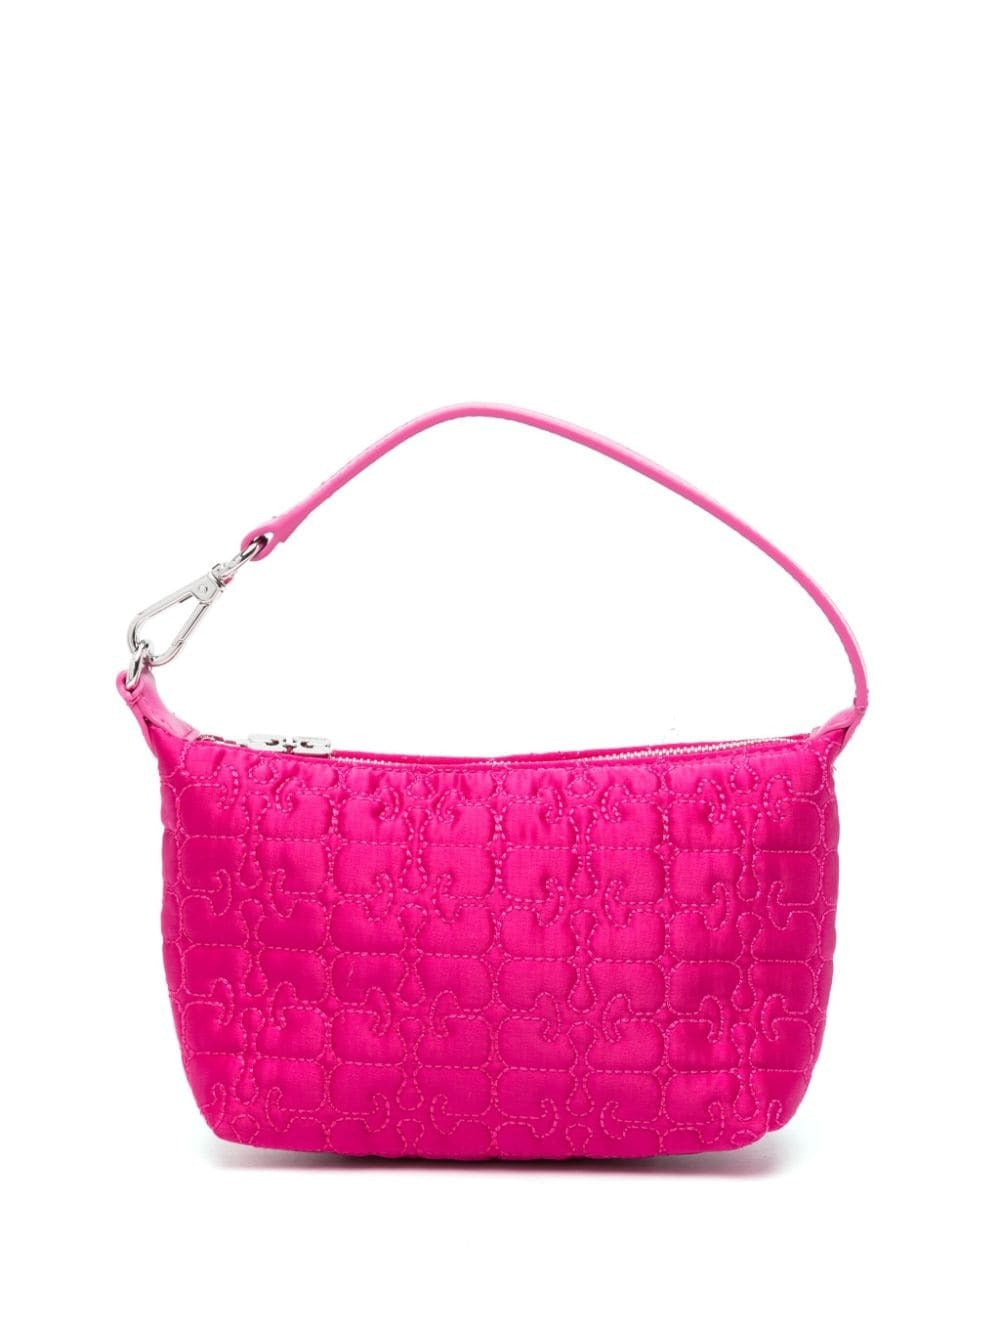 Ganni Butterfly Small Pouch Satin Handbag in Shocking Pink